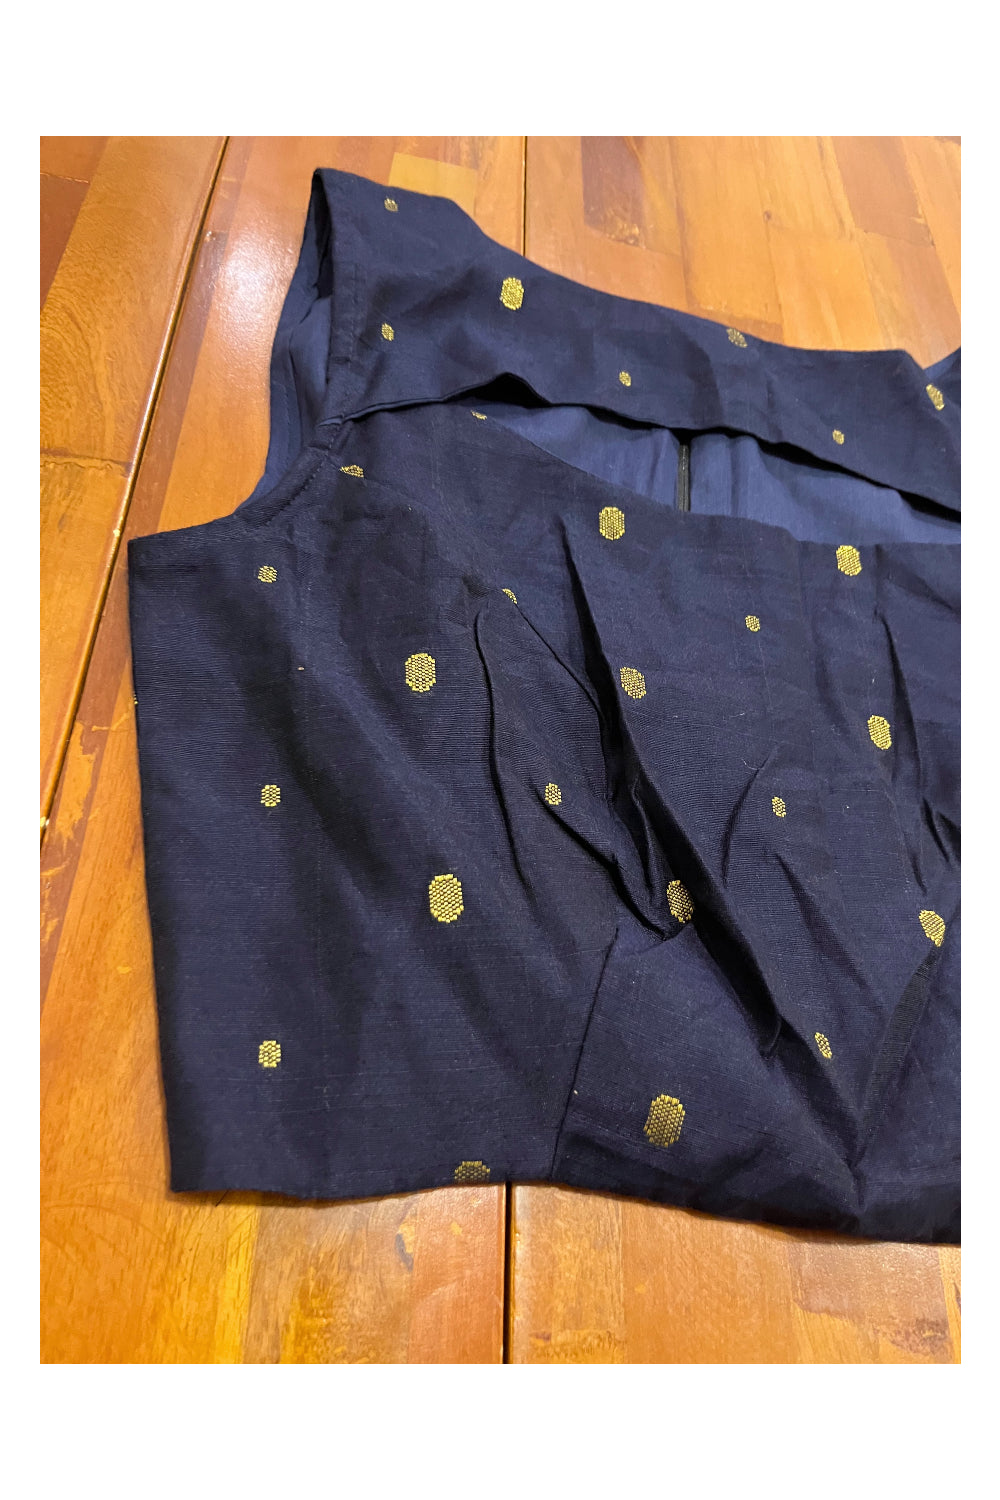 Southloom Navy Blue Golden Butta Works Ready Made Blouse